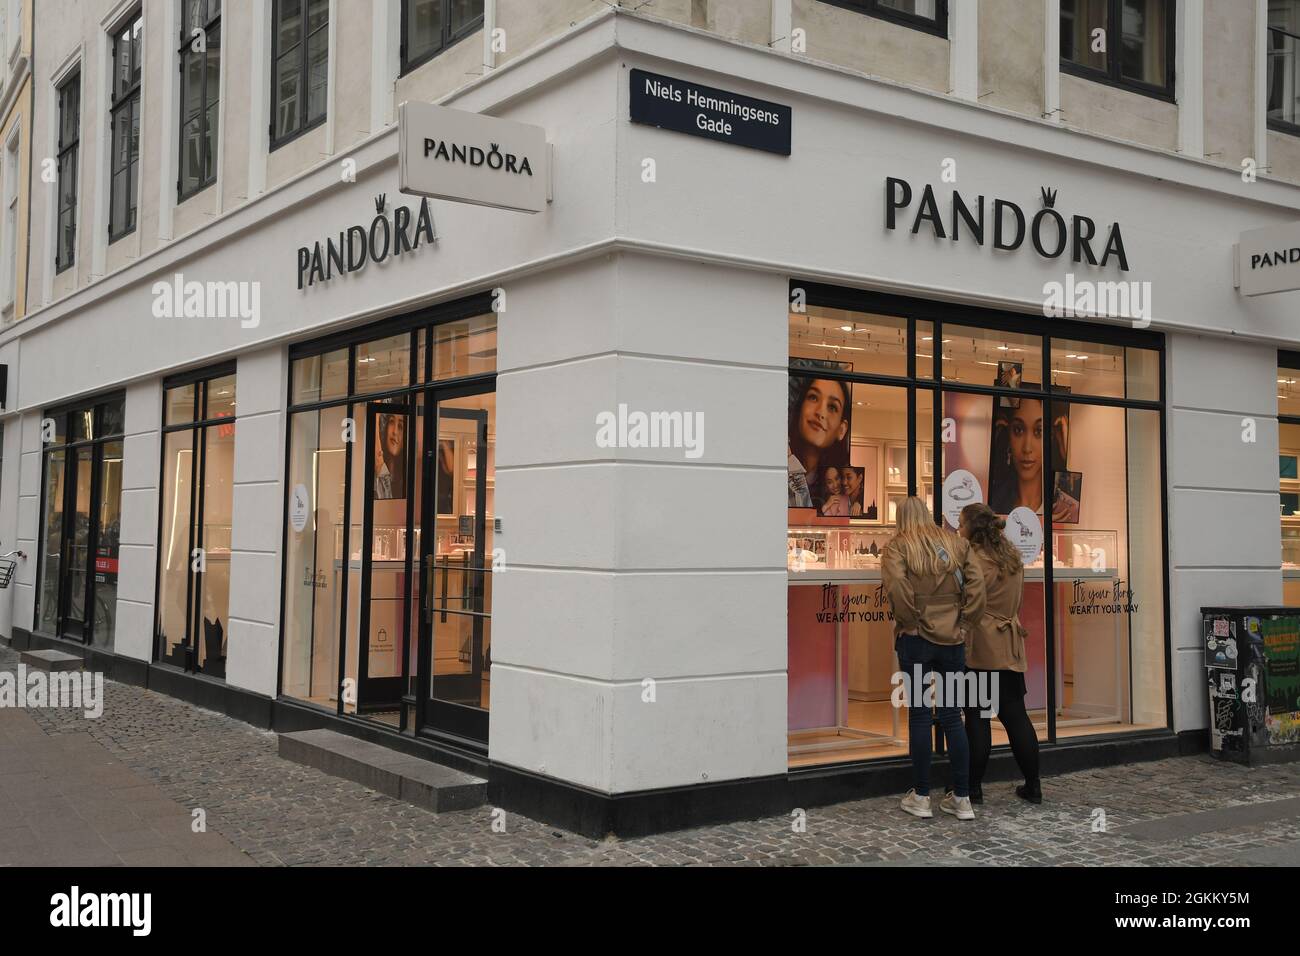 Pandora Store Window High Resolution Stock Photography and Images - Alamy